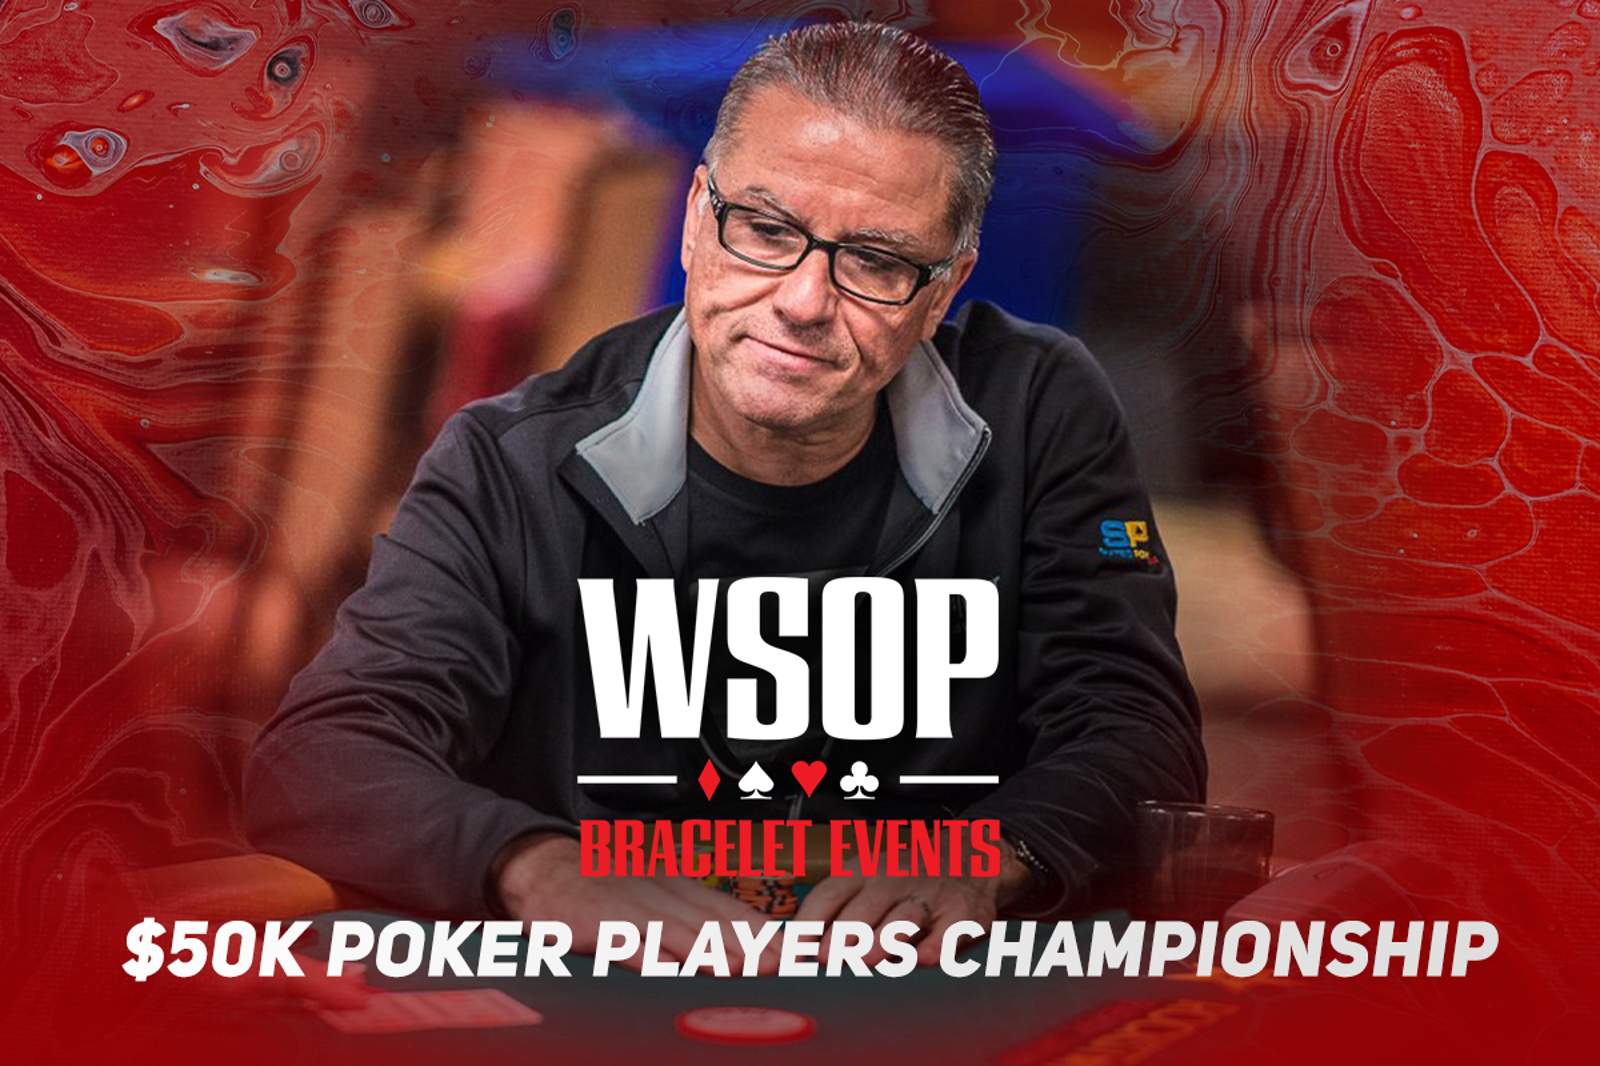 Watch the WSOP Event #60: $50K Poker Players Championship Final Table on PokerGO.com at 6 p.m. ET